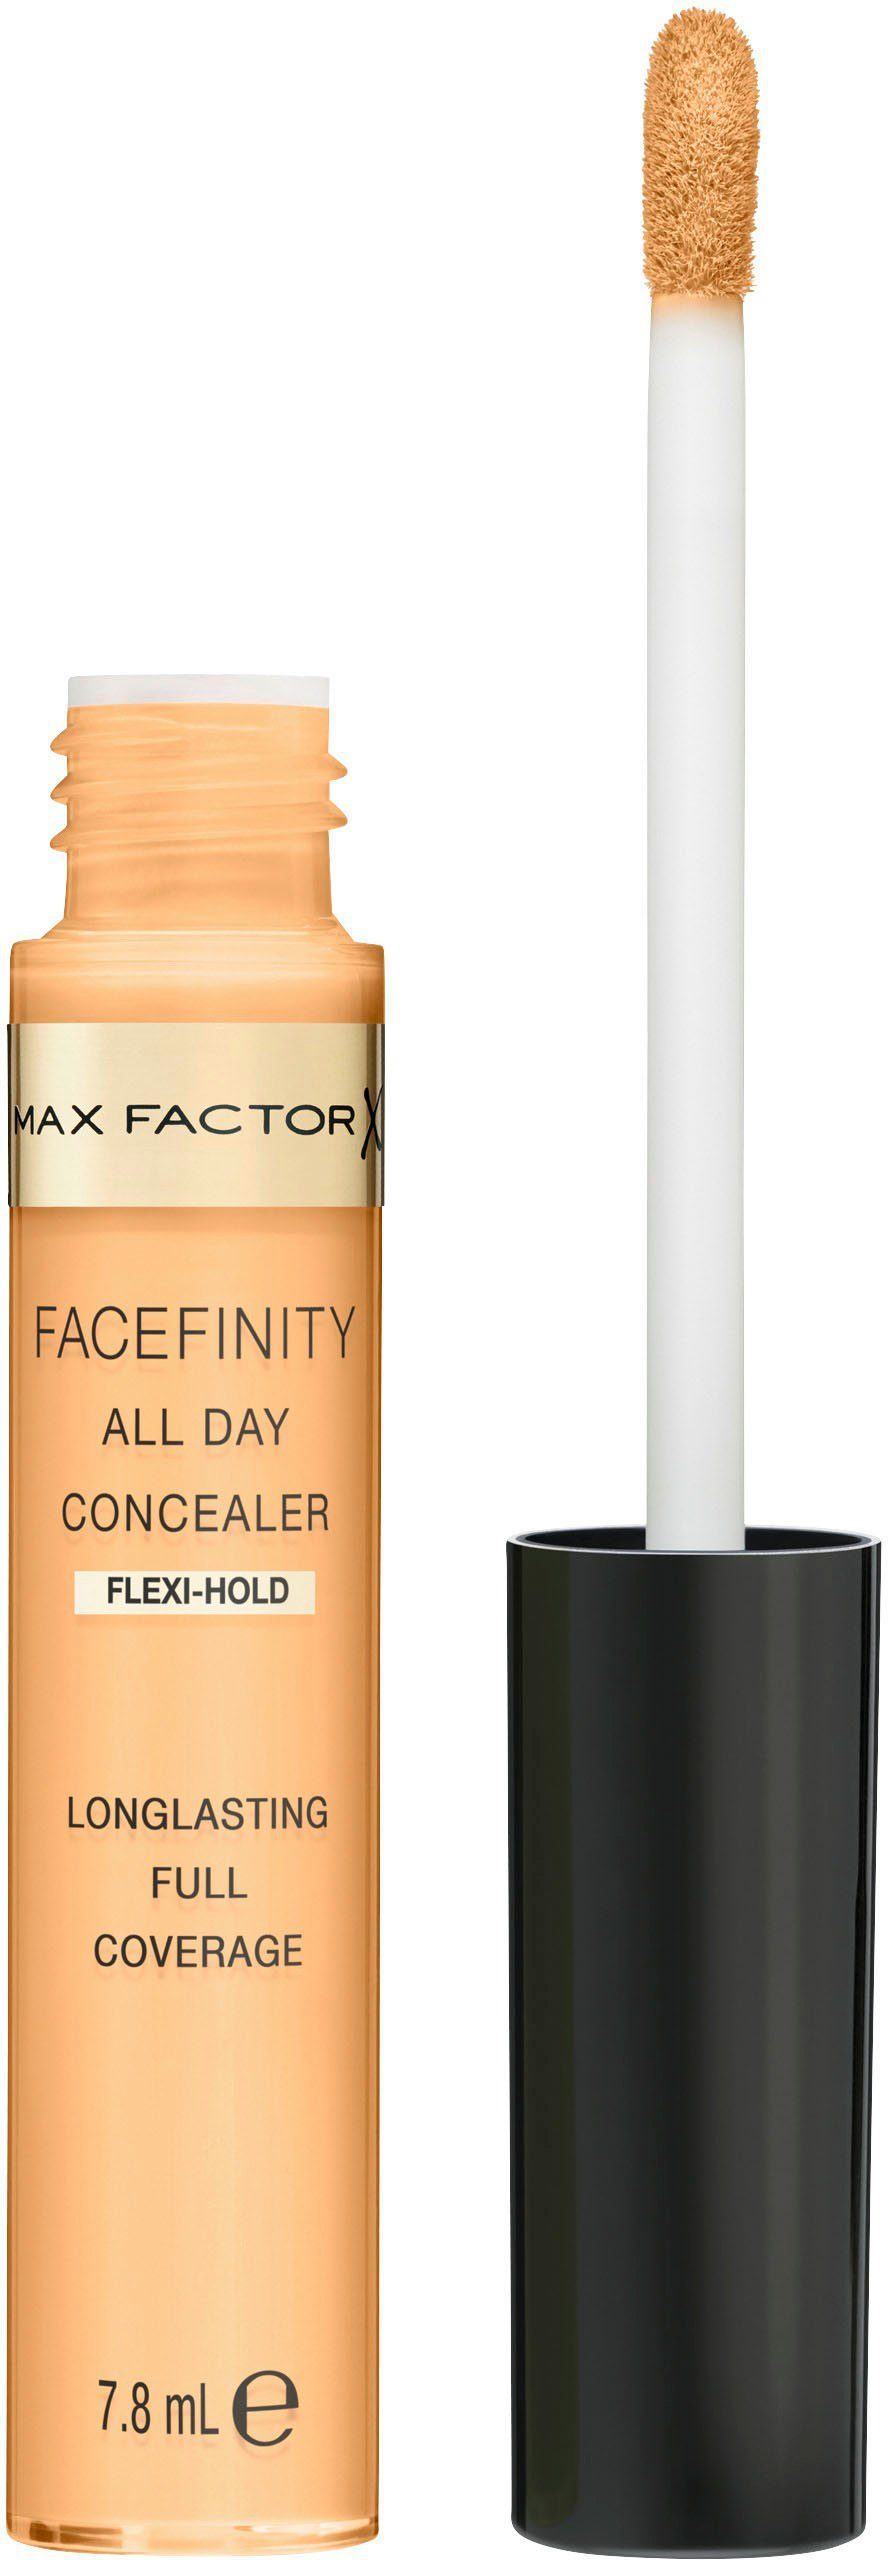 MAX FACTOR Concealer FACEFINITY All Day Flawless 40 | Concealer